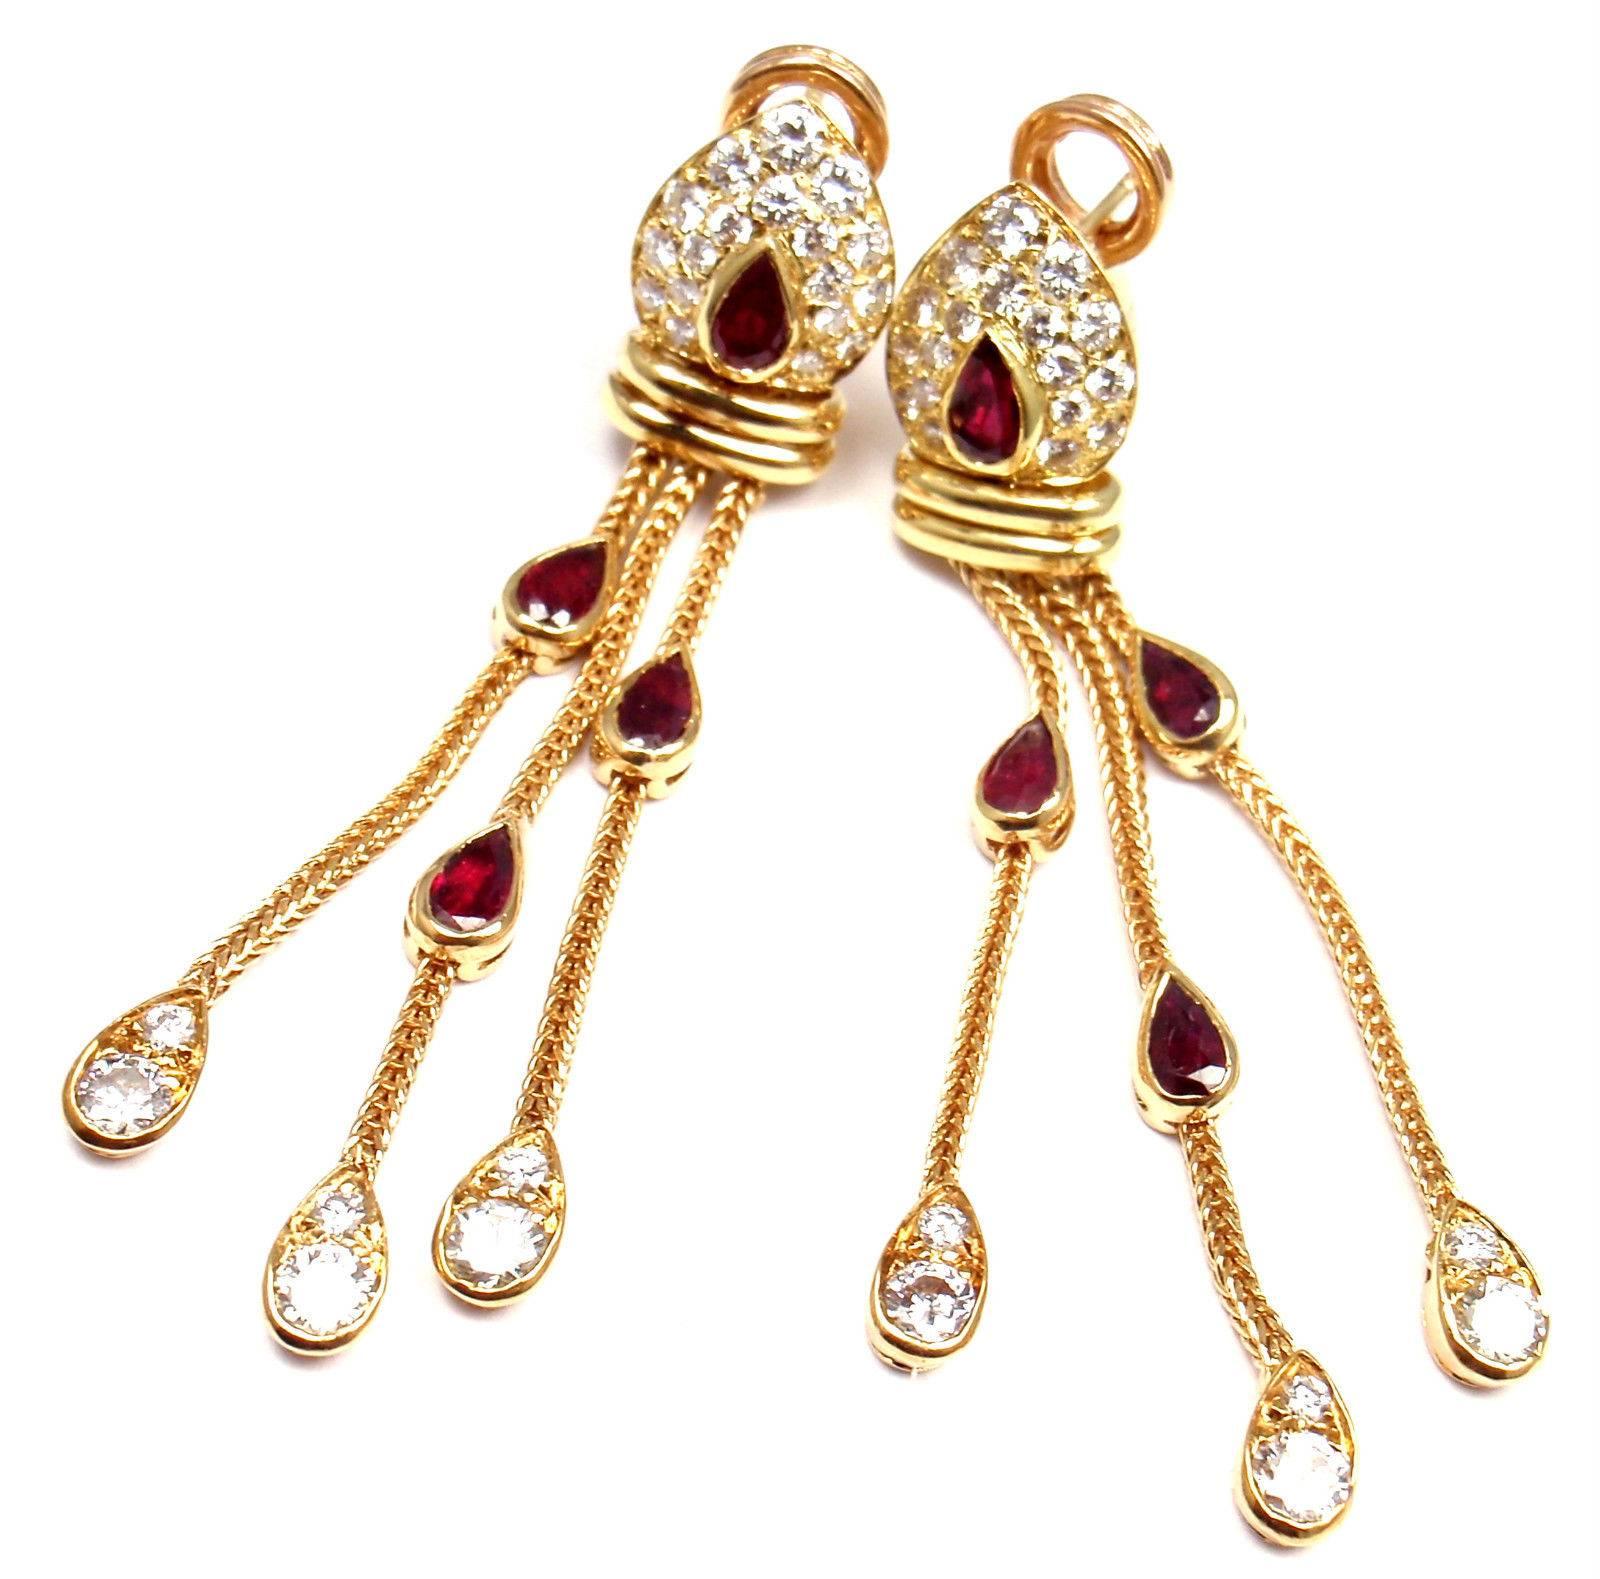 18k Yellow Gold Diamond And Ruby Vintage Hanging Earrings by Van Cleef & Arpels. 
These earrings are clips, made for pierced ears. 
With 48 round brilliant cut diamonds VVS1 clarity, E color total weight approx. 1.35ct
8 pear shape rubies total